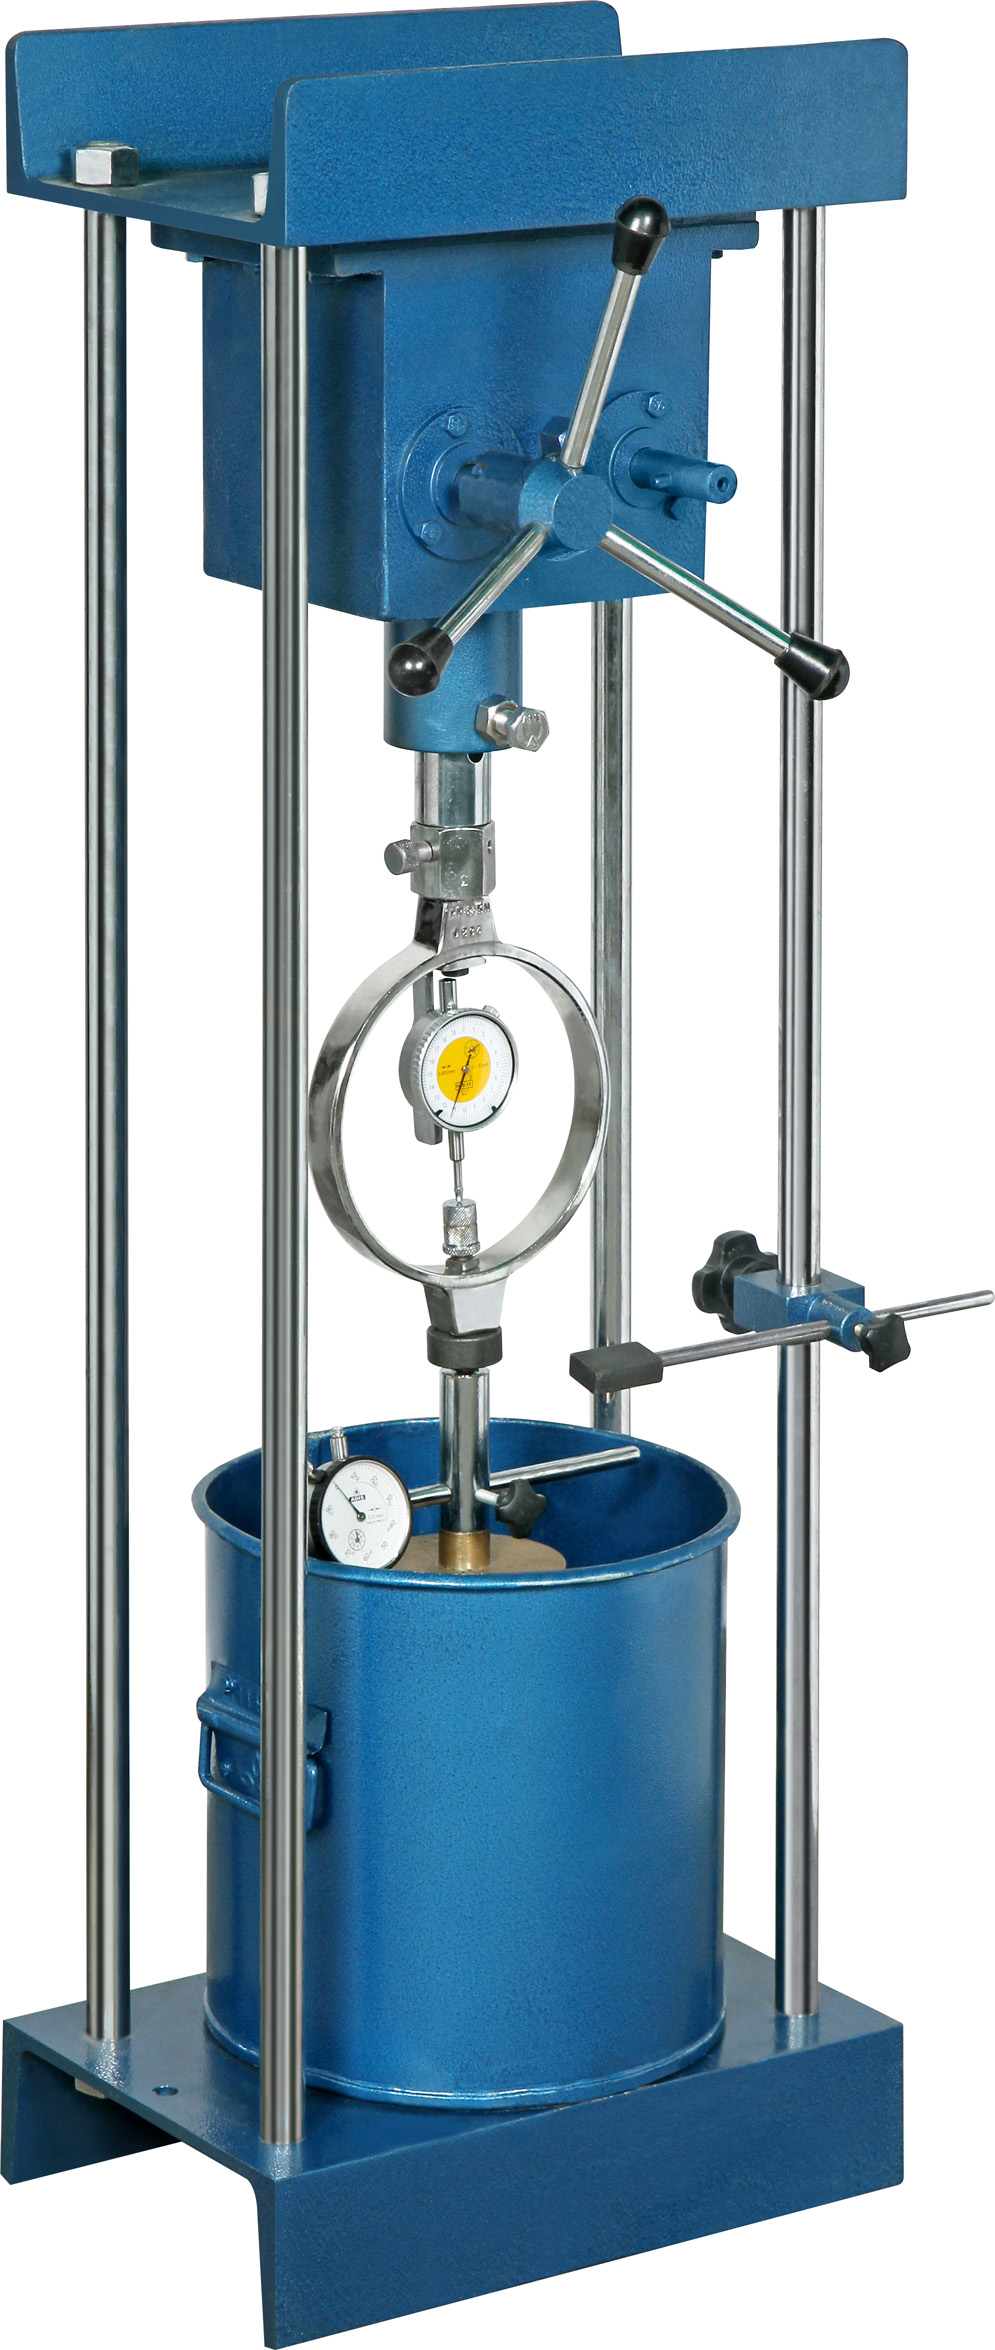 SWELL PRESSURE TEST APPARATUS WITH PROVING RING AND DIAL GAUGE*